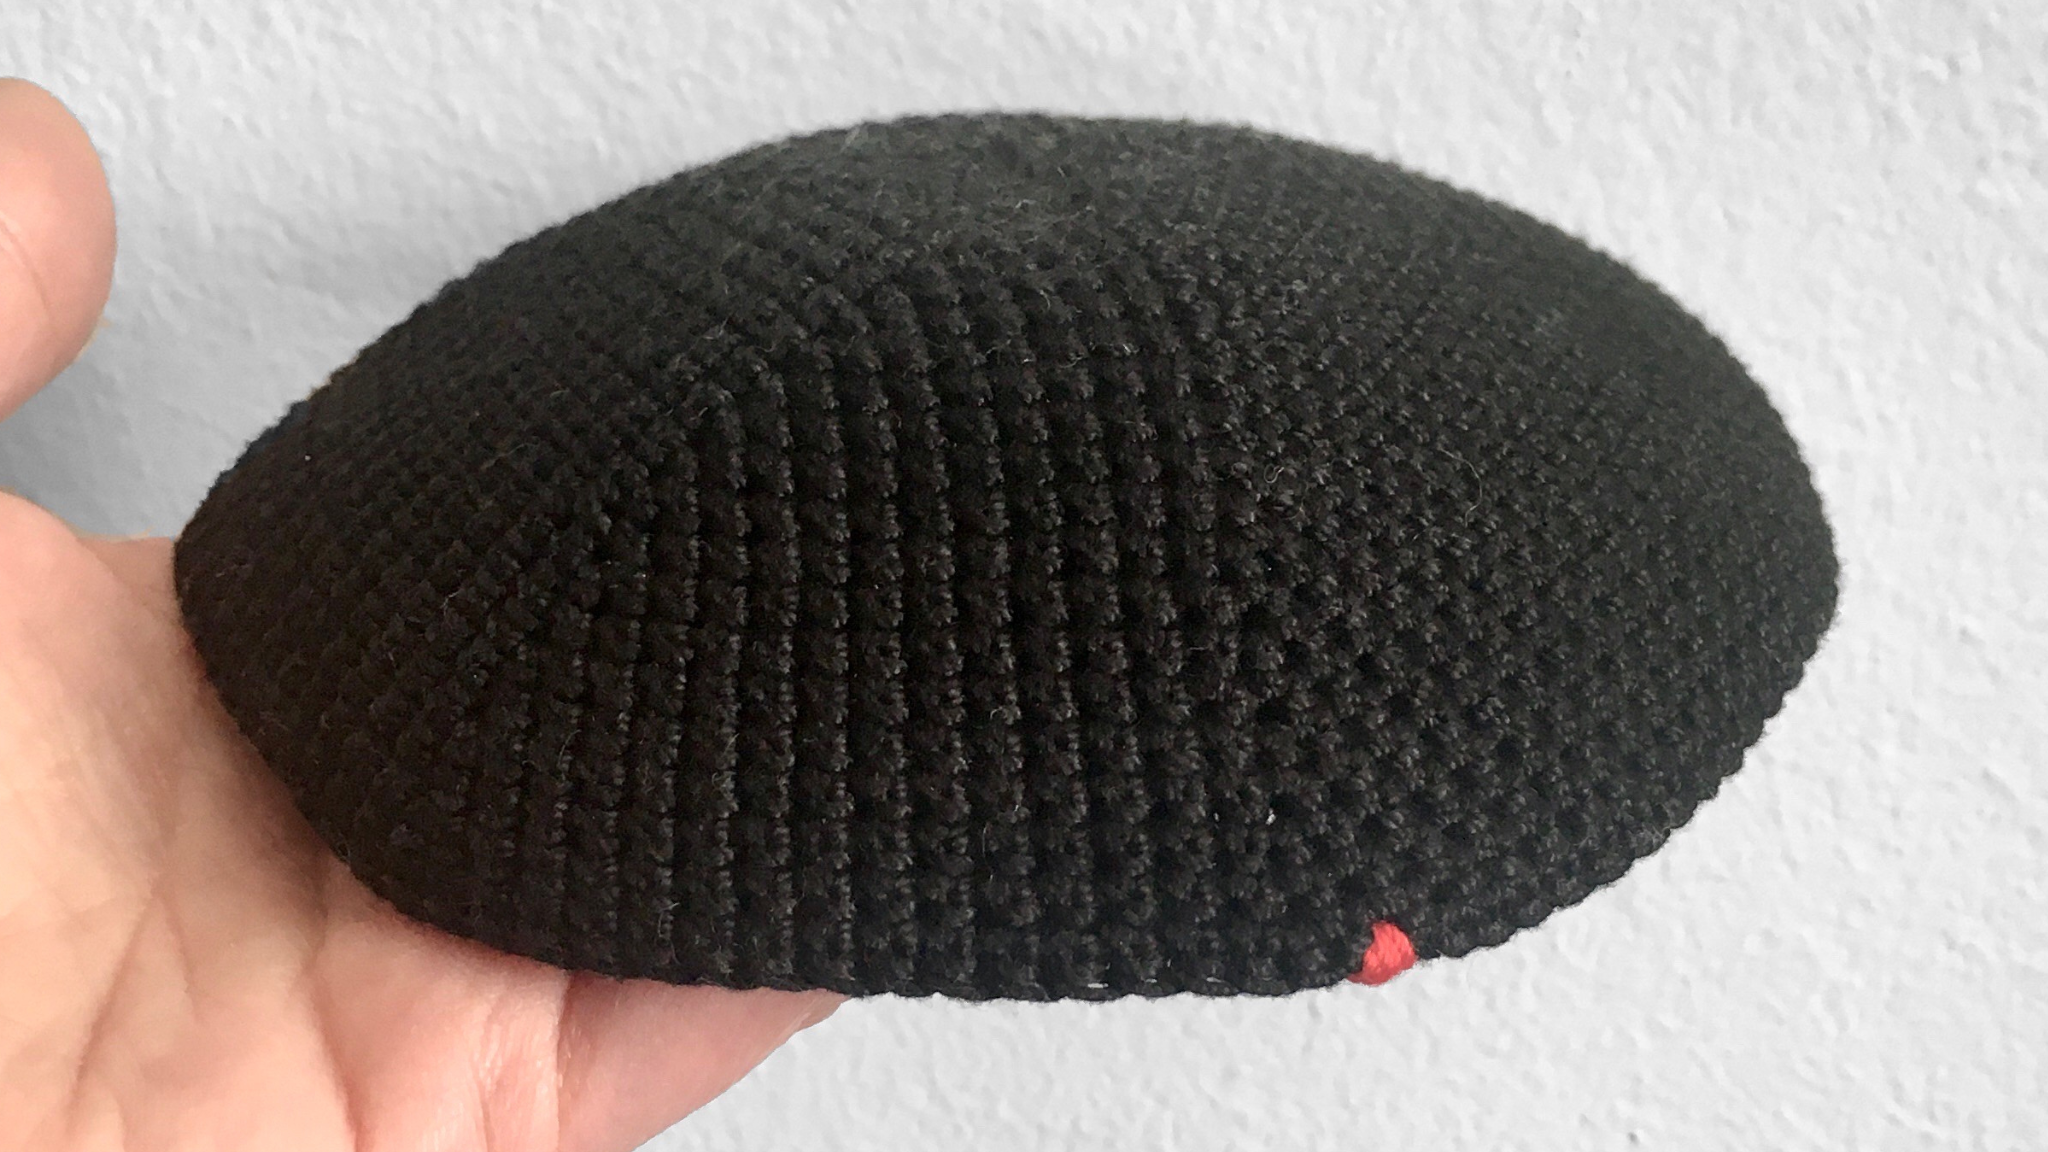 Close up of the Penelope D Thin Kippah in black, showing the Penelope D 7-thread crimson red knot mark.